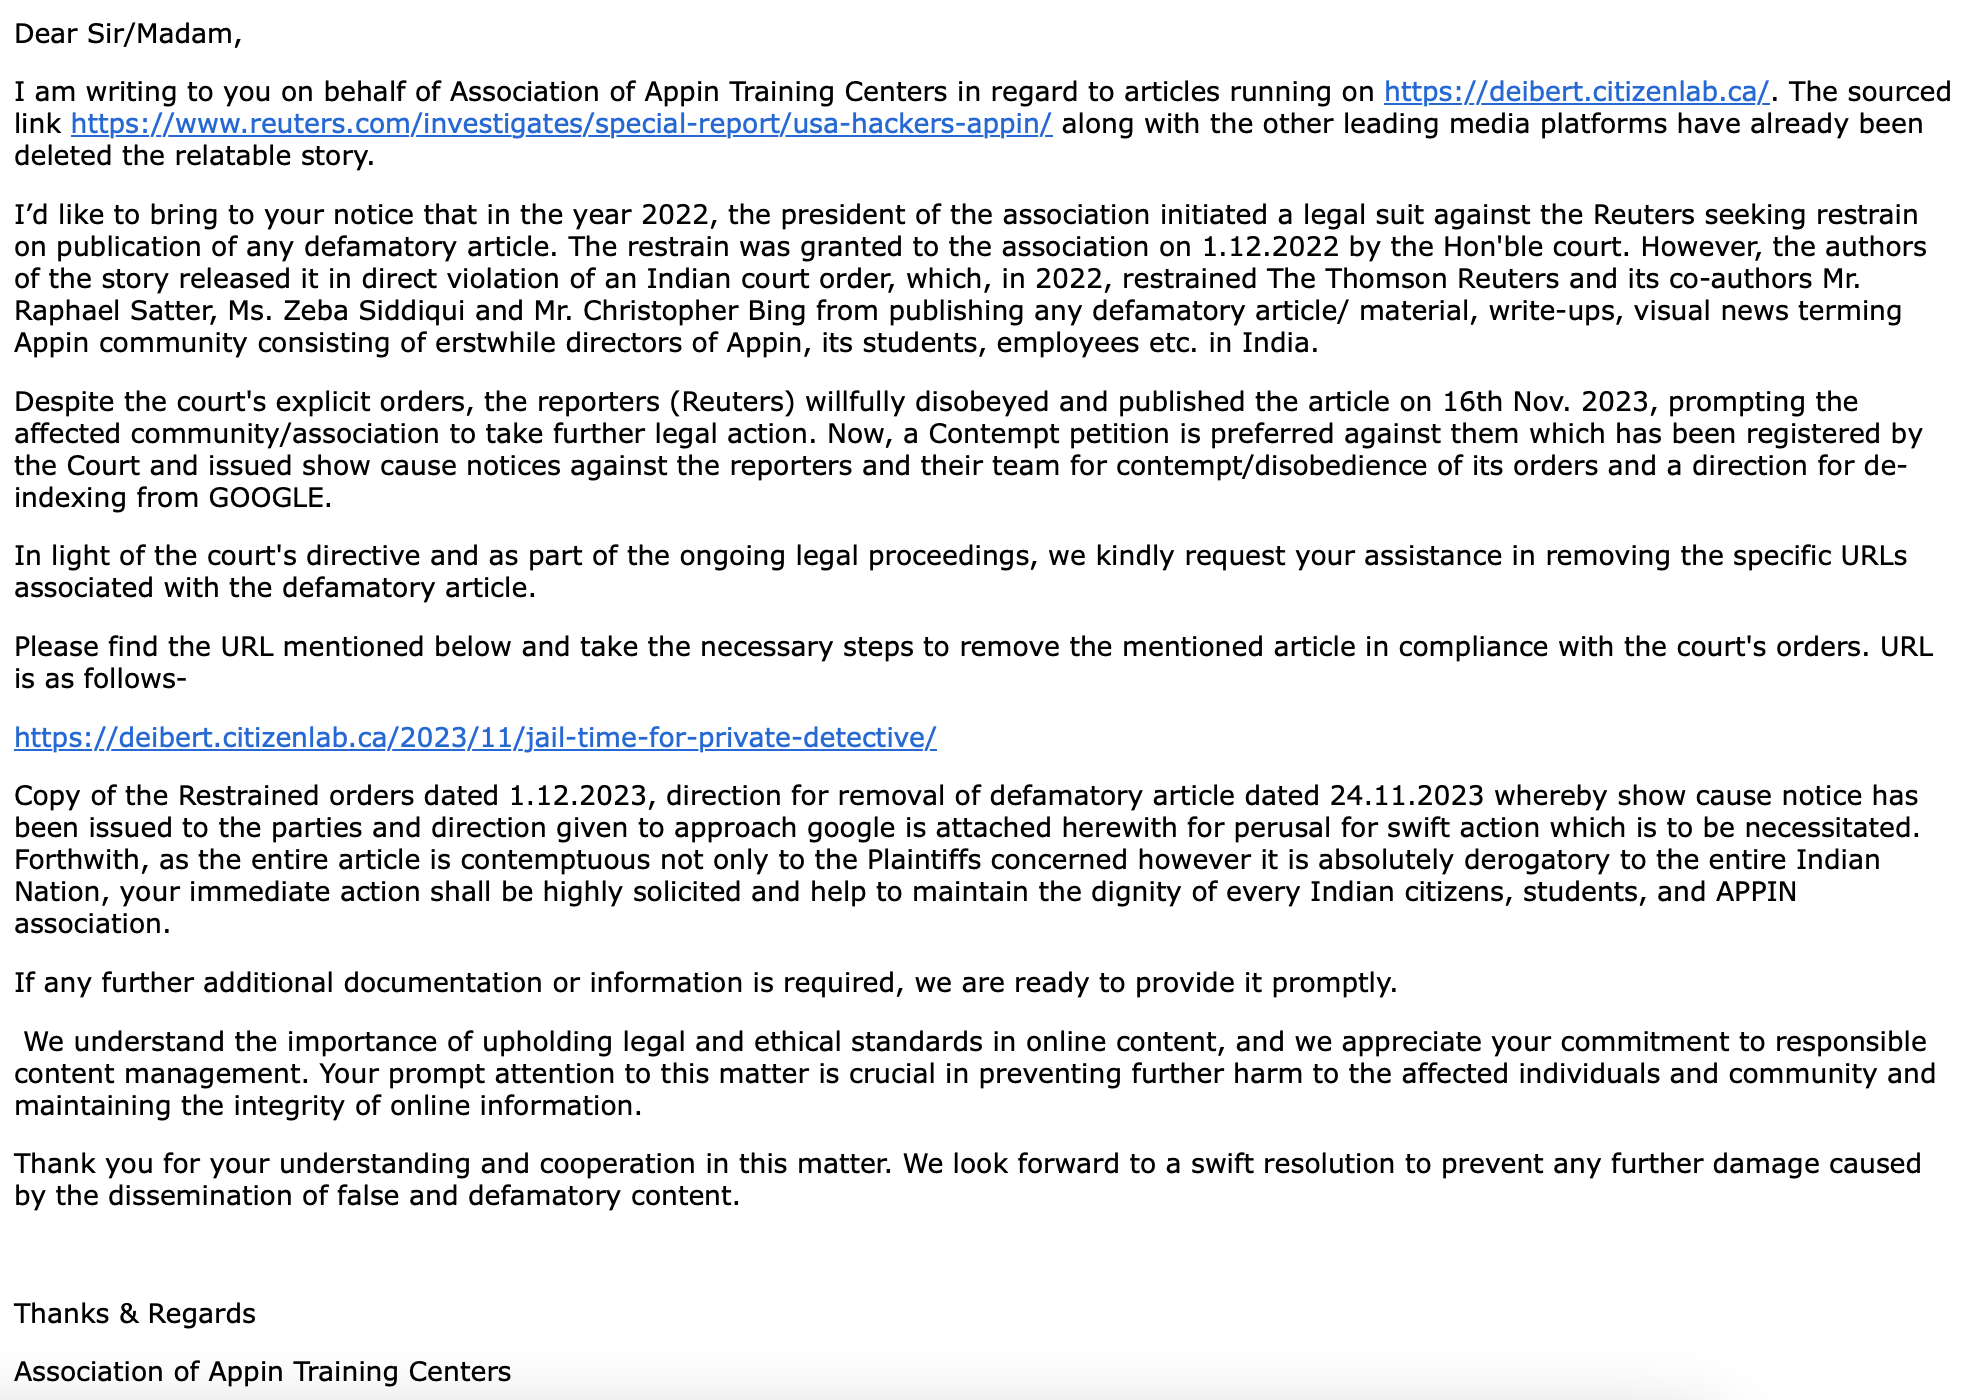 A letter from the association of appin training centers to citizenlab asking the latter to take down their story .